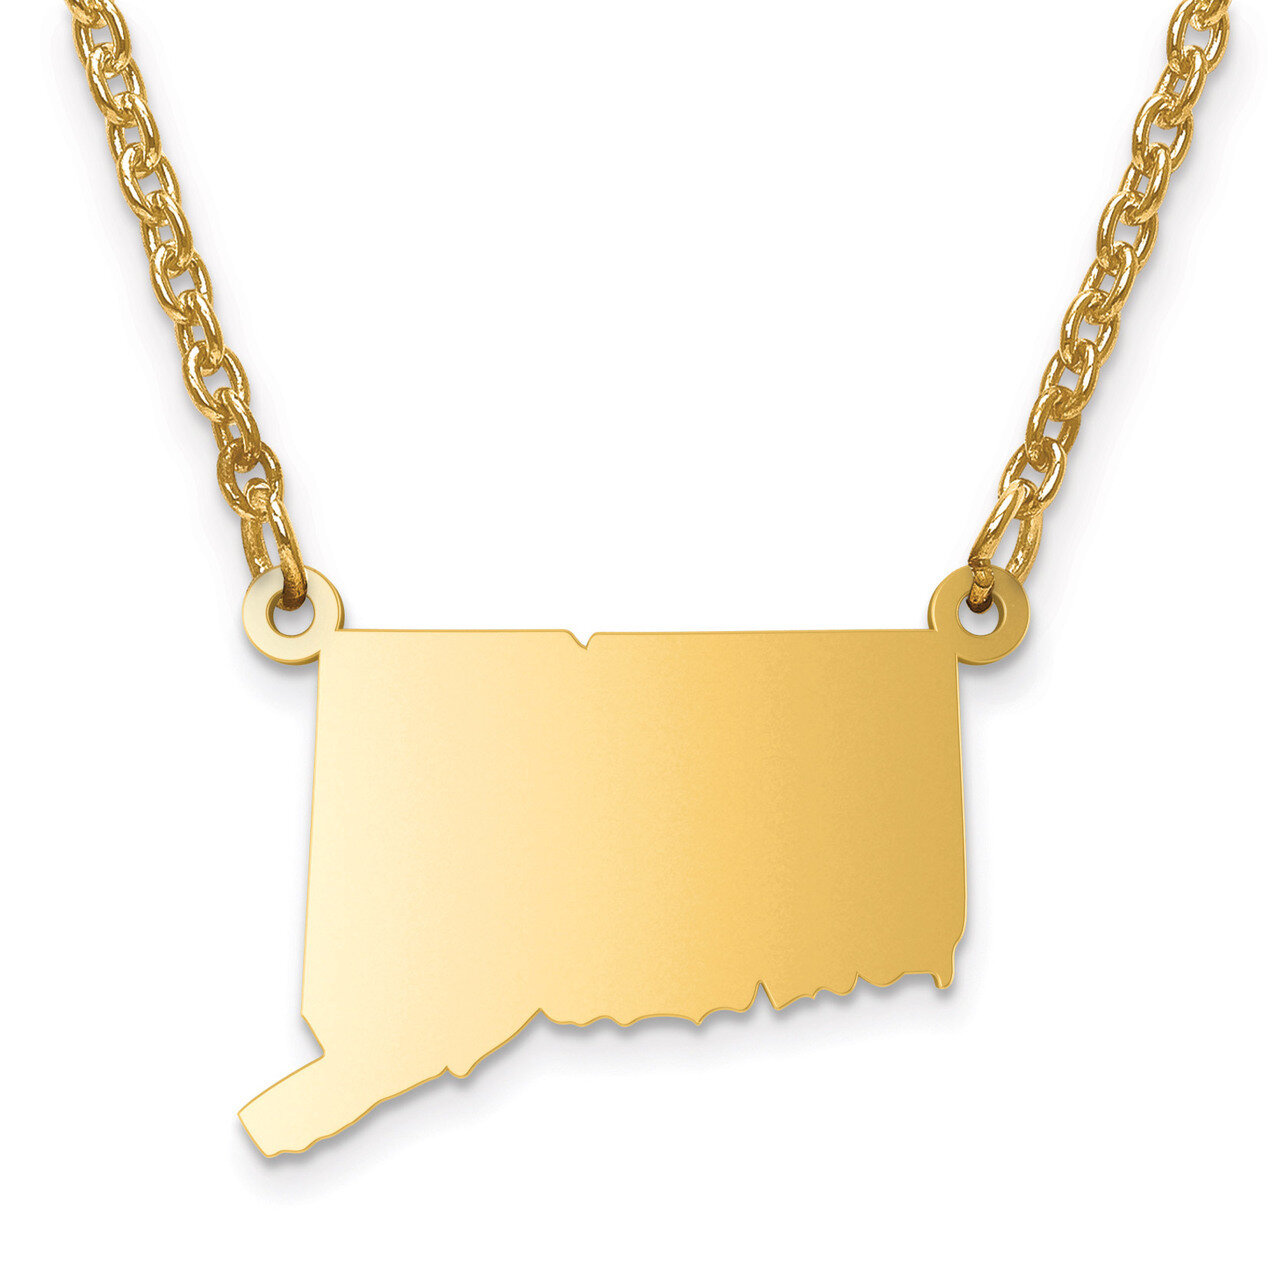 Connecticut State Pendant with Chain Engravable Gold-plated on Sterling Silver